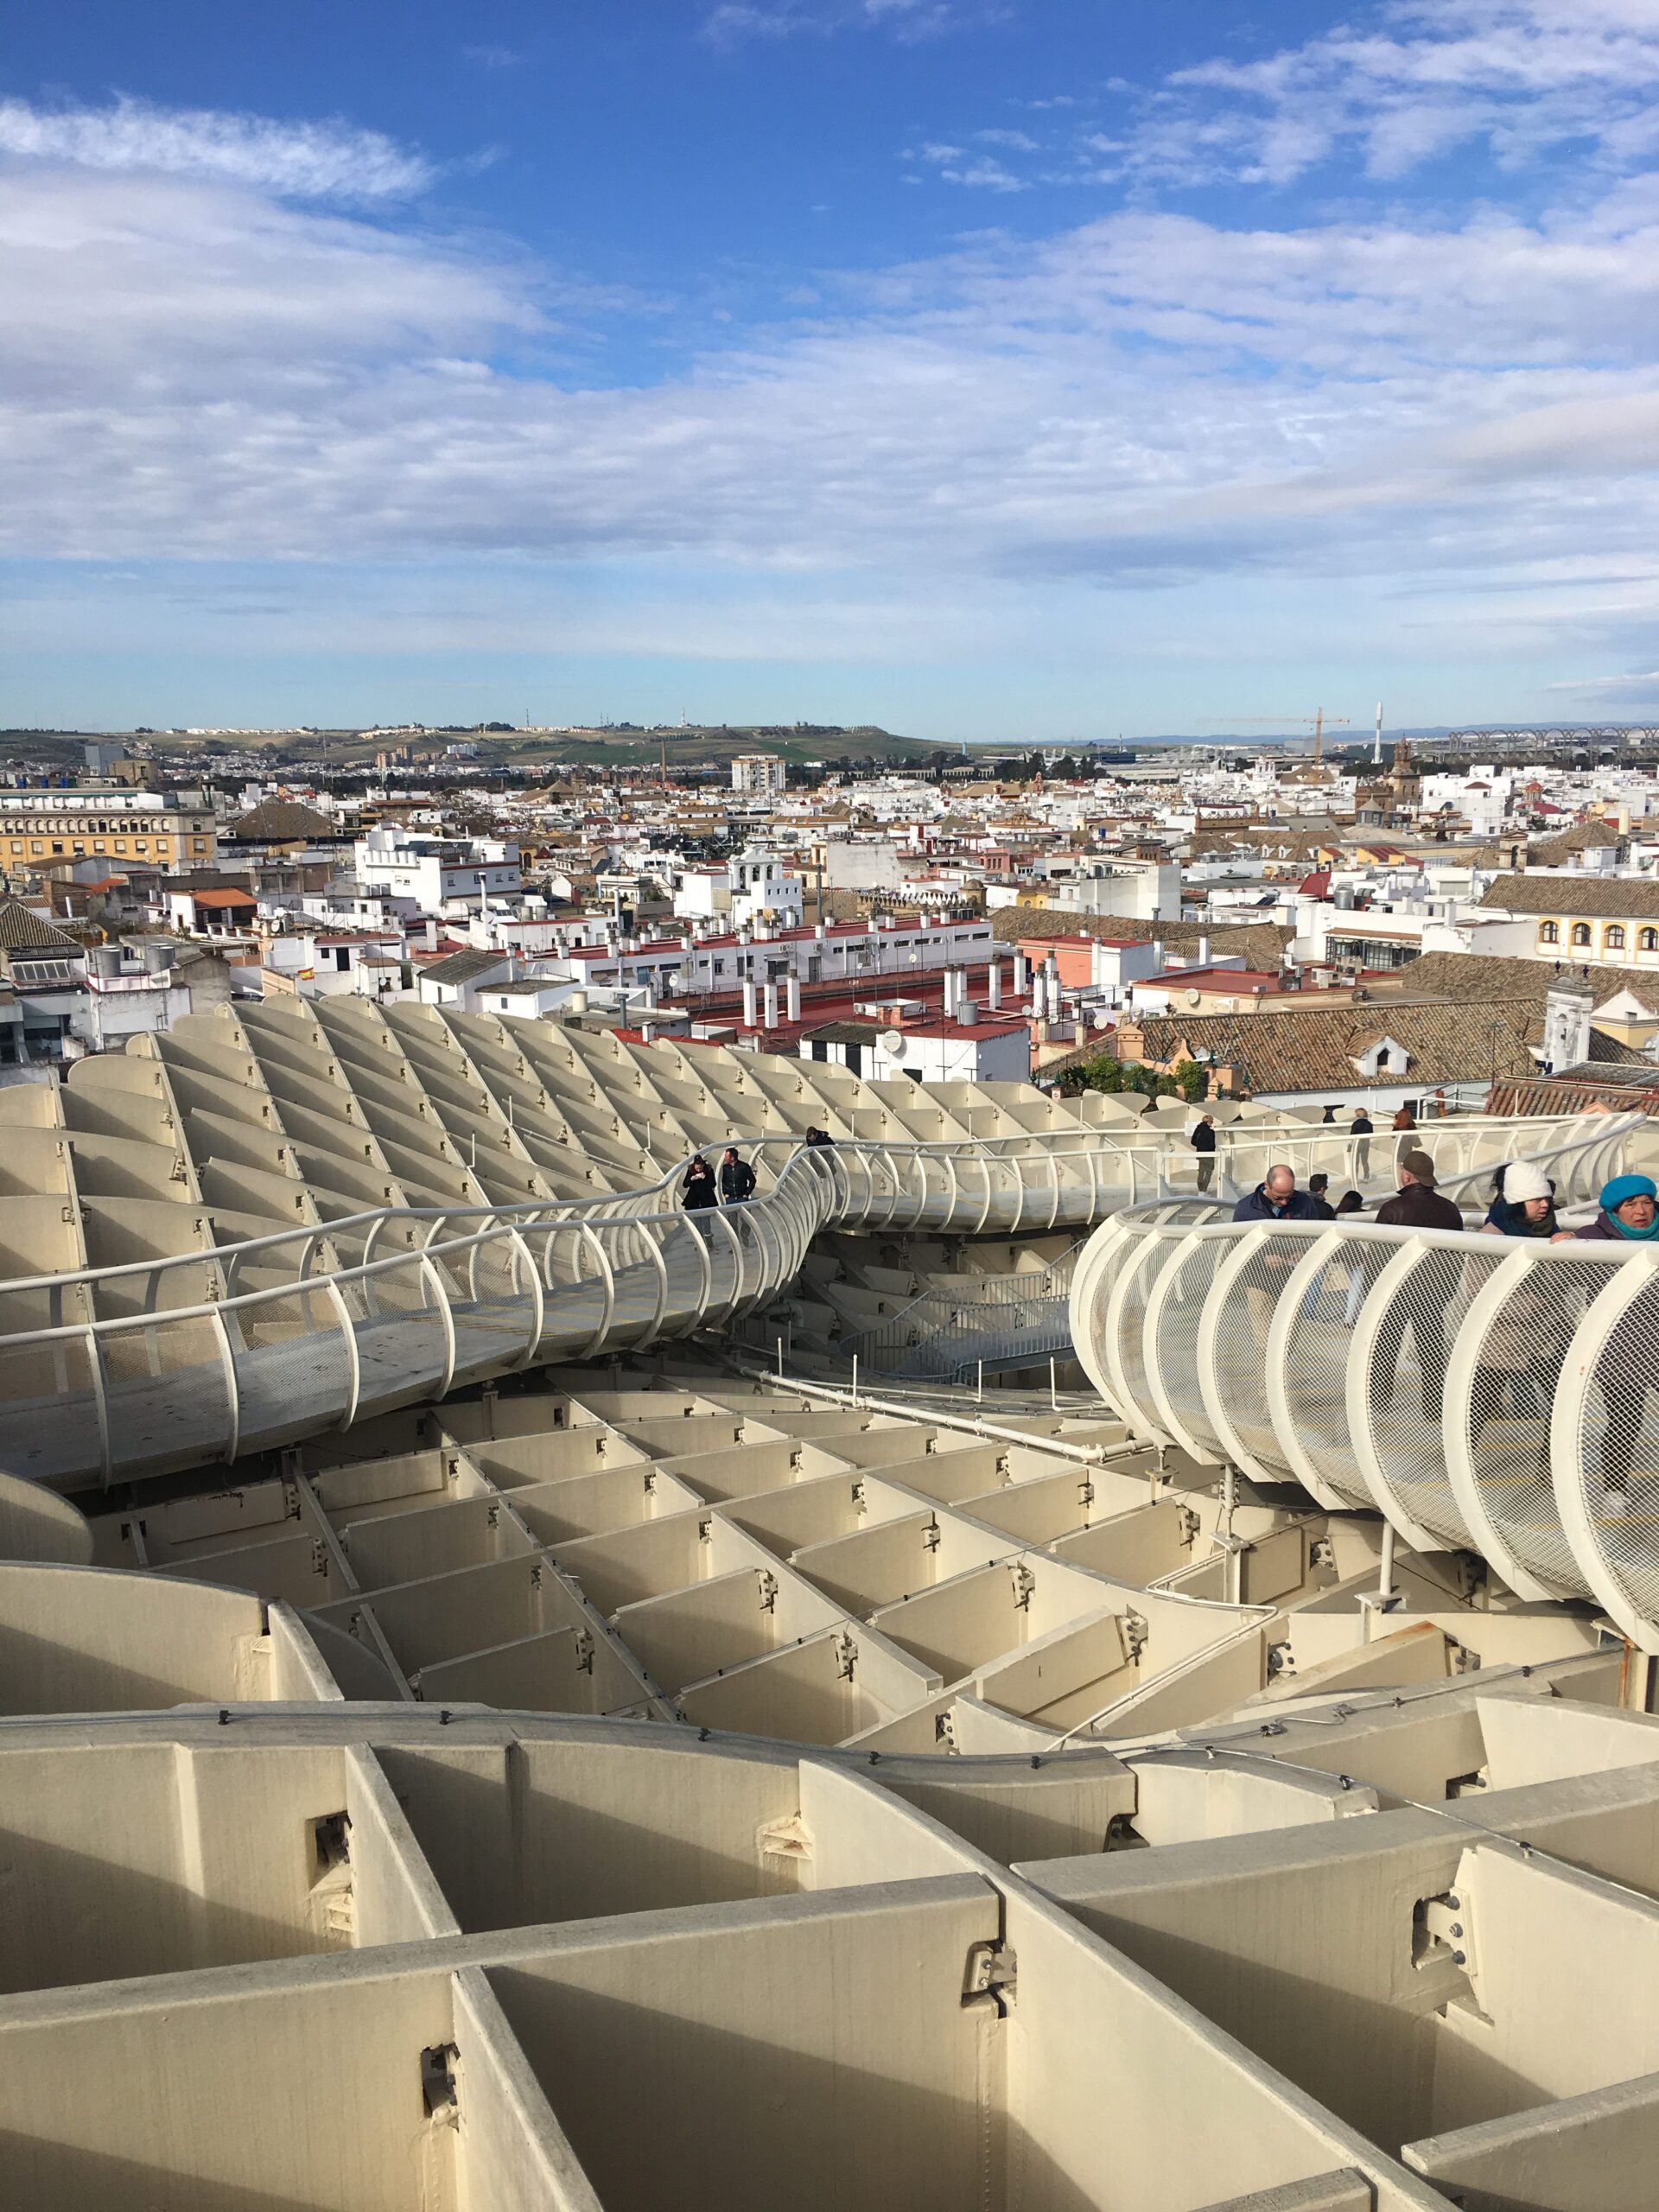 Views from the top of Metropol Parasol